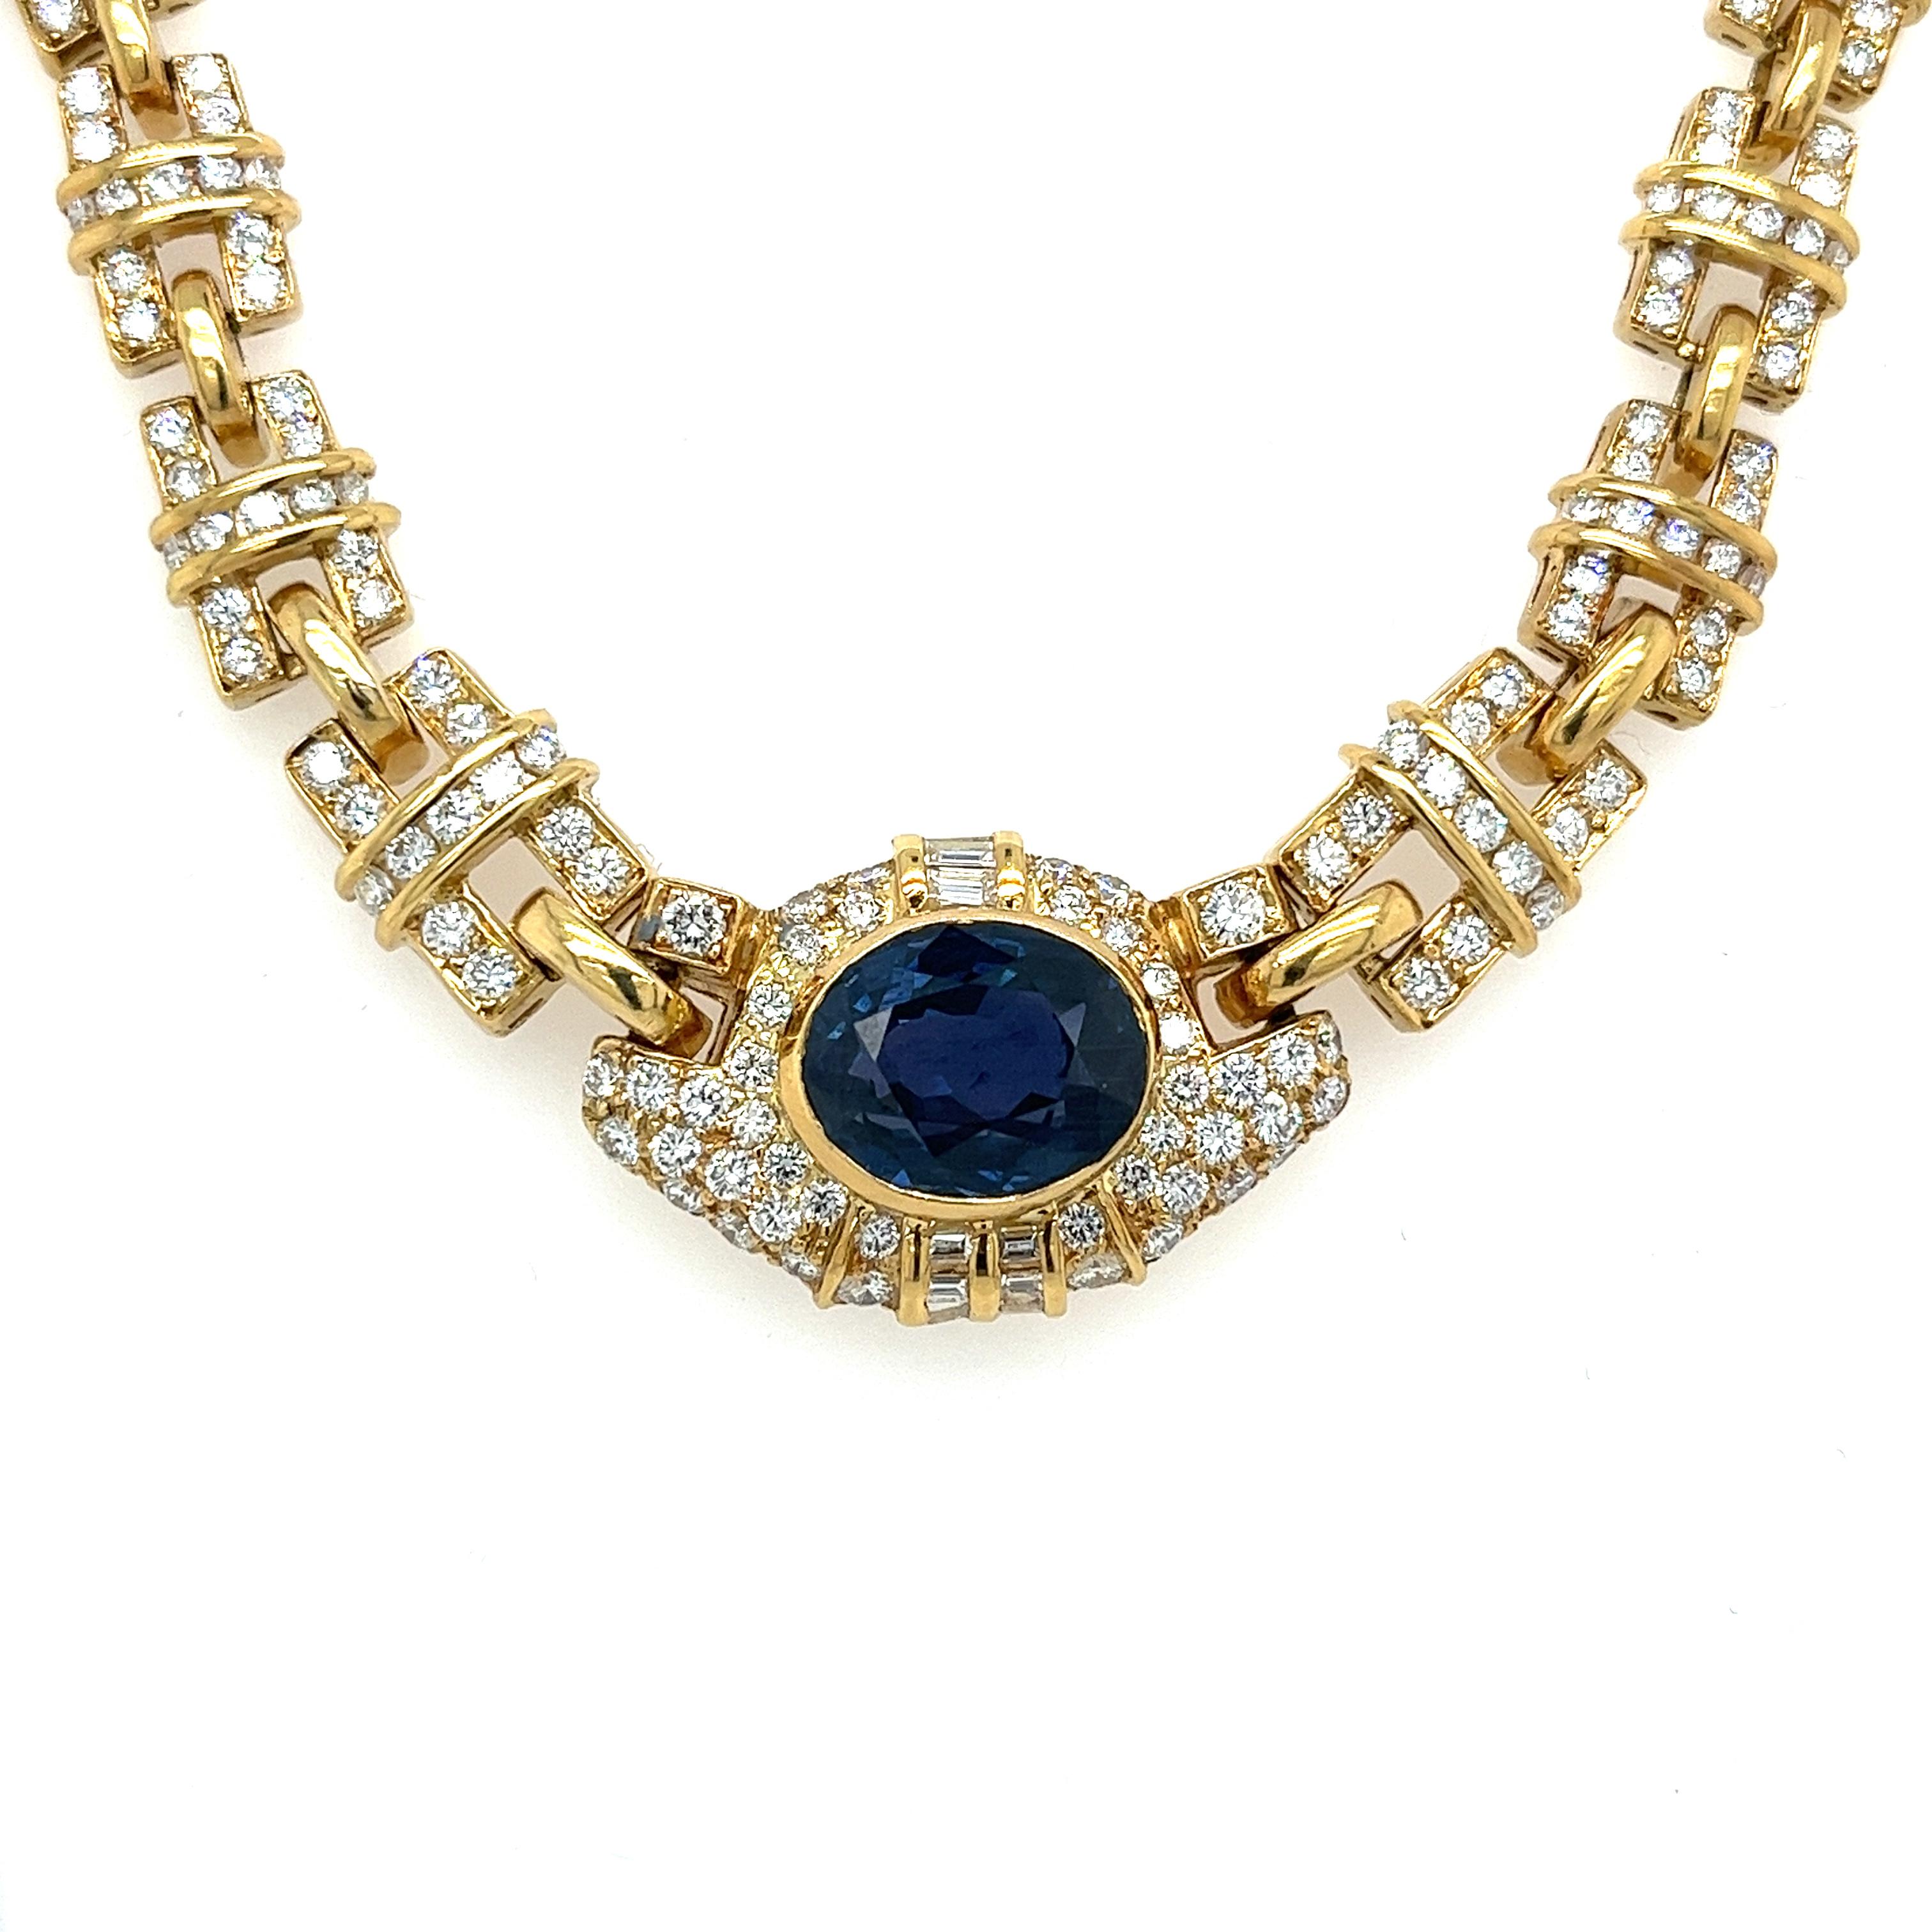 GIA certified no heat, untreated, Blue Sapphire mounted in an 18-karat gold bezel set choker necklace. Choker features 158 natural diamonds with near flawless clarity and mesmerizing brilliance. Finely crafted in polished 18k yellow gold, the artful